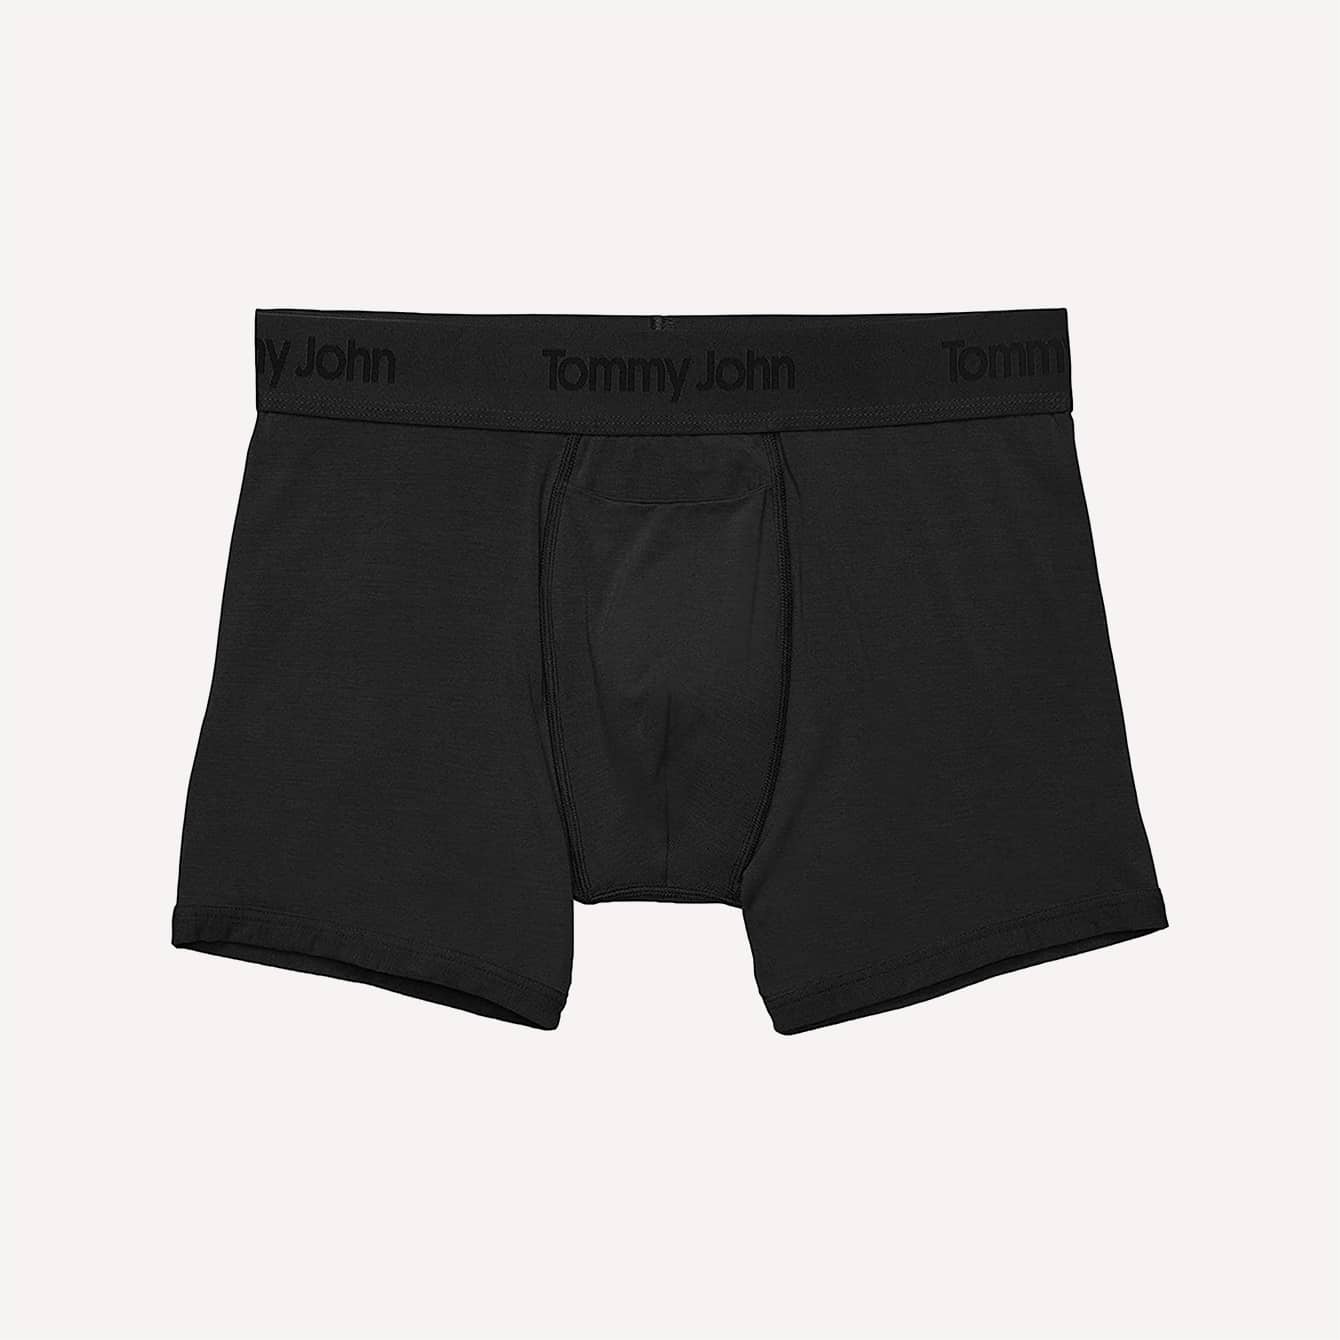 Tommy John Boxer Briefs Second Skin Fabric Trunk